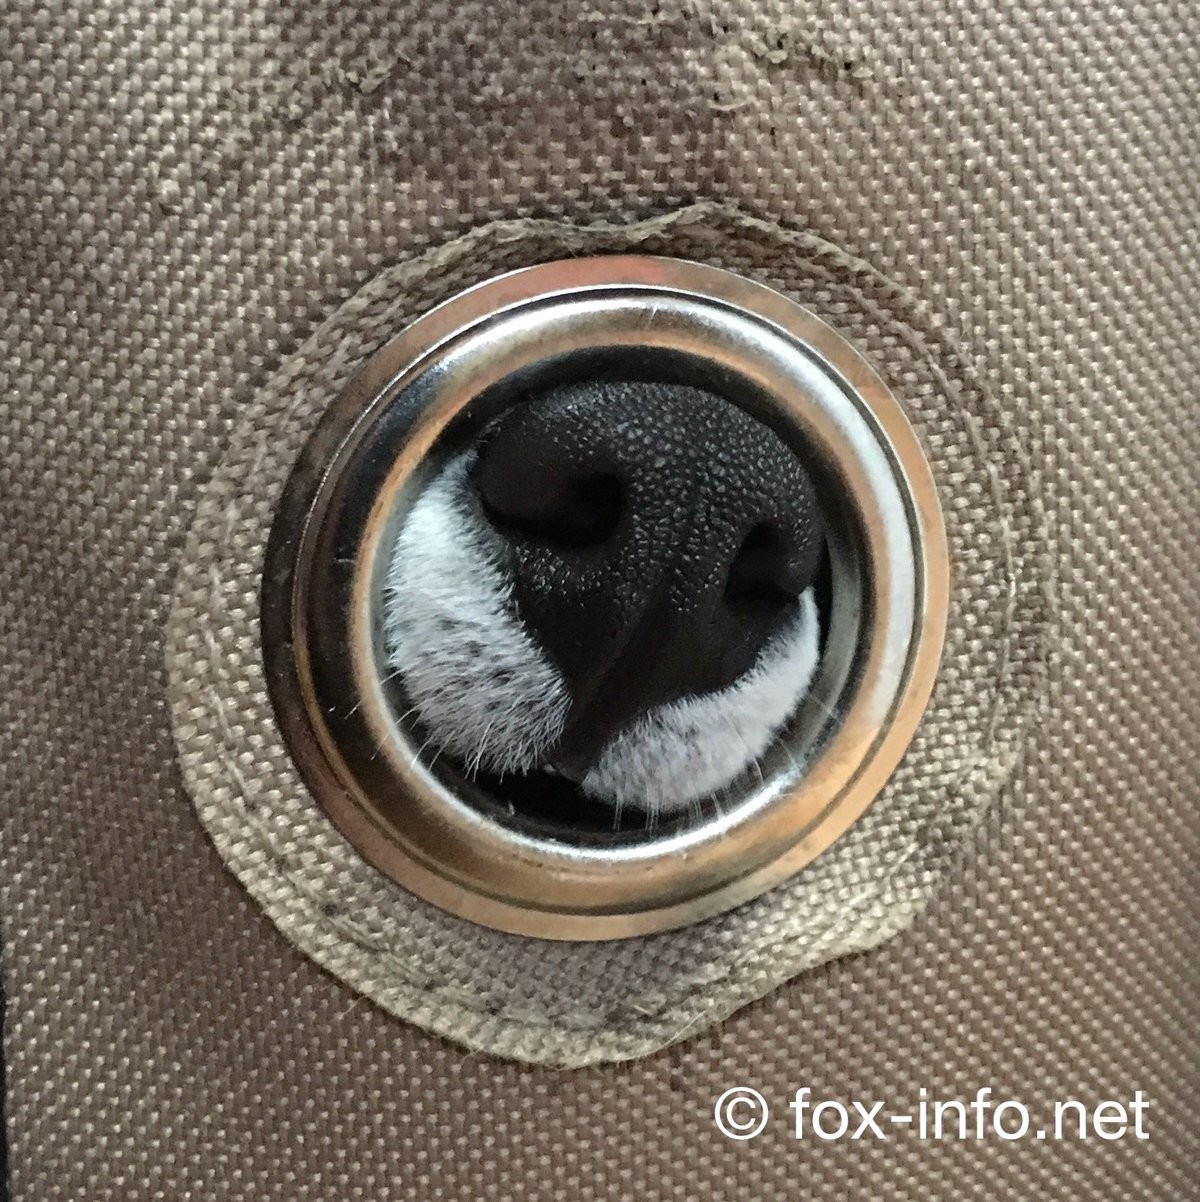 Guess the snoot (its very difficult). .